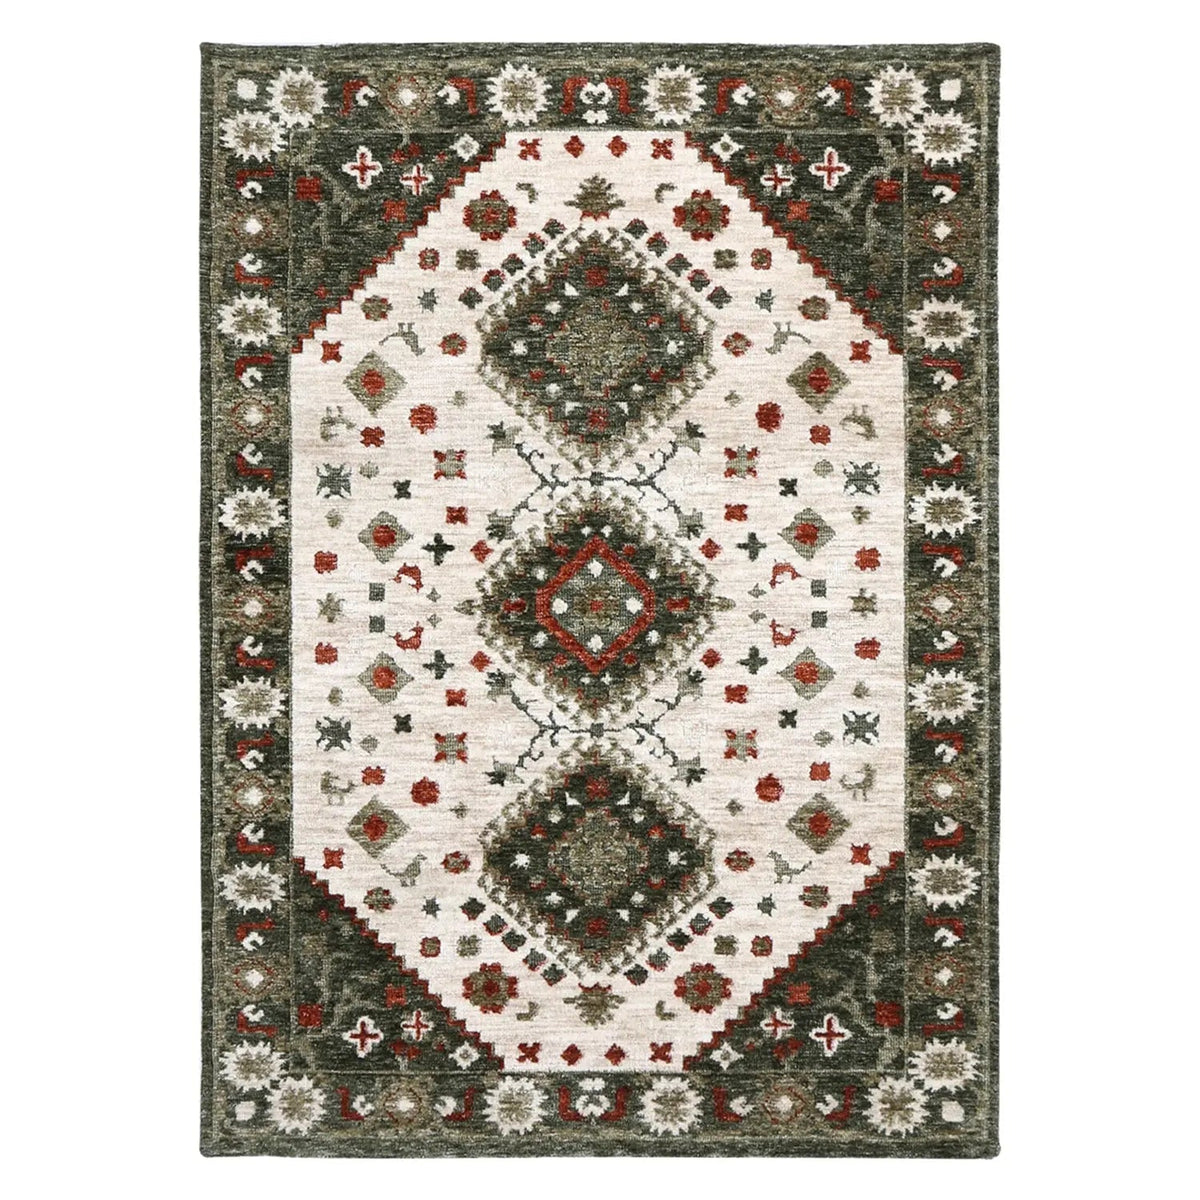 Chantico Forest Ornate Rug - Rugs - Rugs a Million